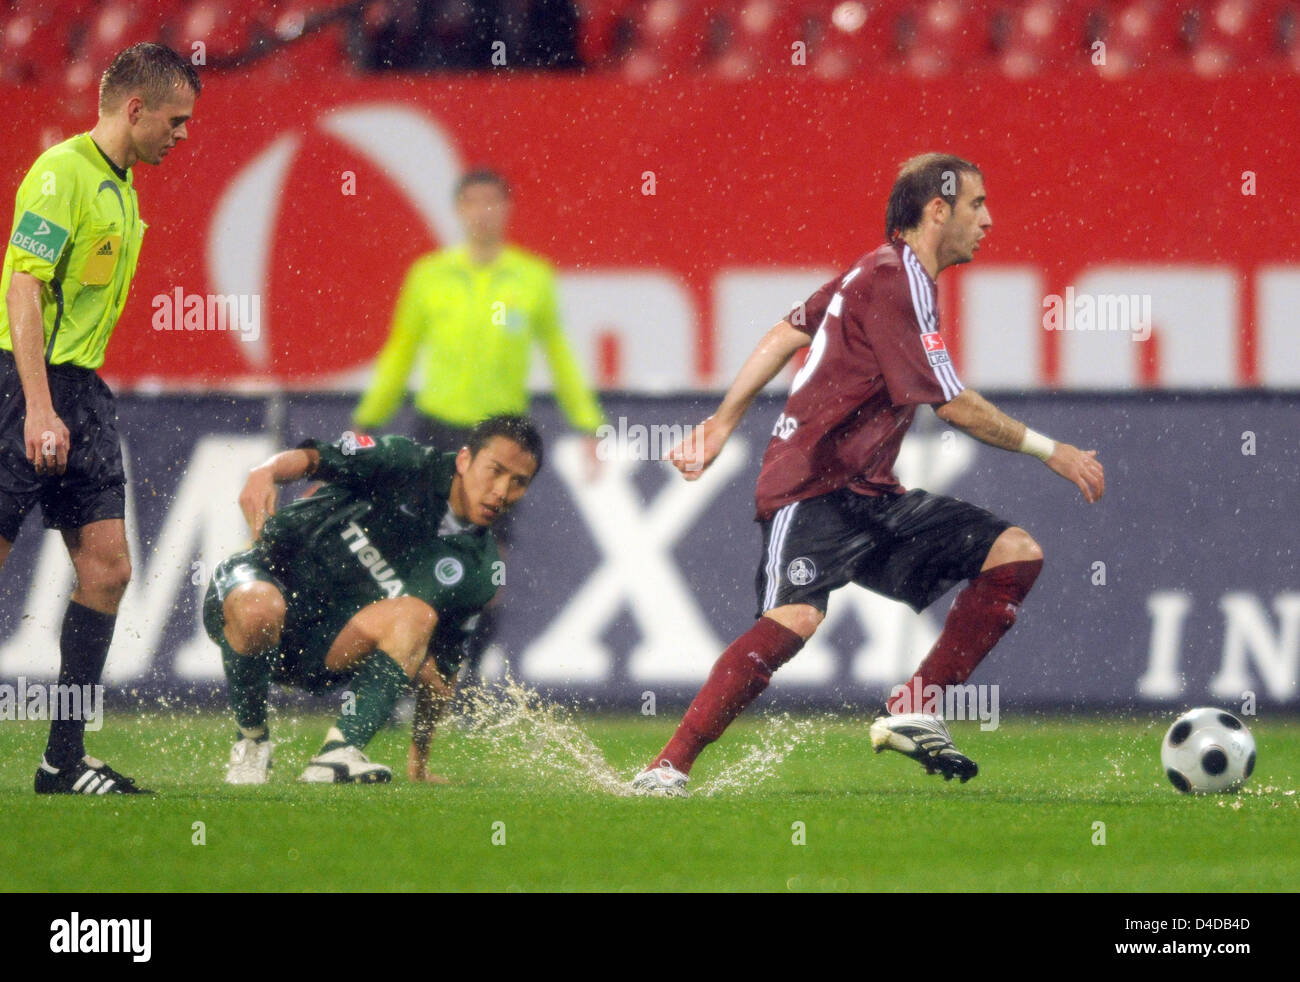 Nuremberg's Javier Pinola (R) vies for the ball with Wolfsburg's Josue during the Bundesliga match 1. FC Nuremberg vs VfL Wolfsburg at easyCredit stadium in Nuremberg, Germany, 11 April 2008. Due to heavy rainfall, the match had to be abandoned after the first half at the result of 1-0 for Nuremberg. Photo: Armin Weigel Stock Photo